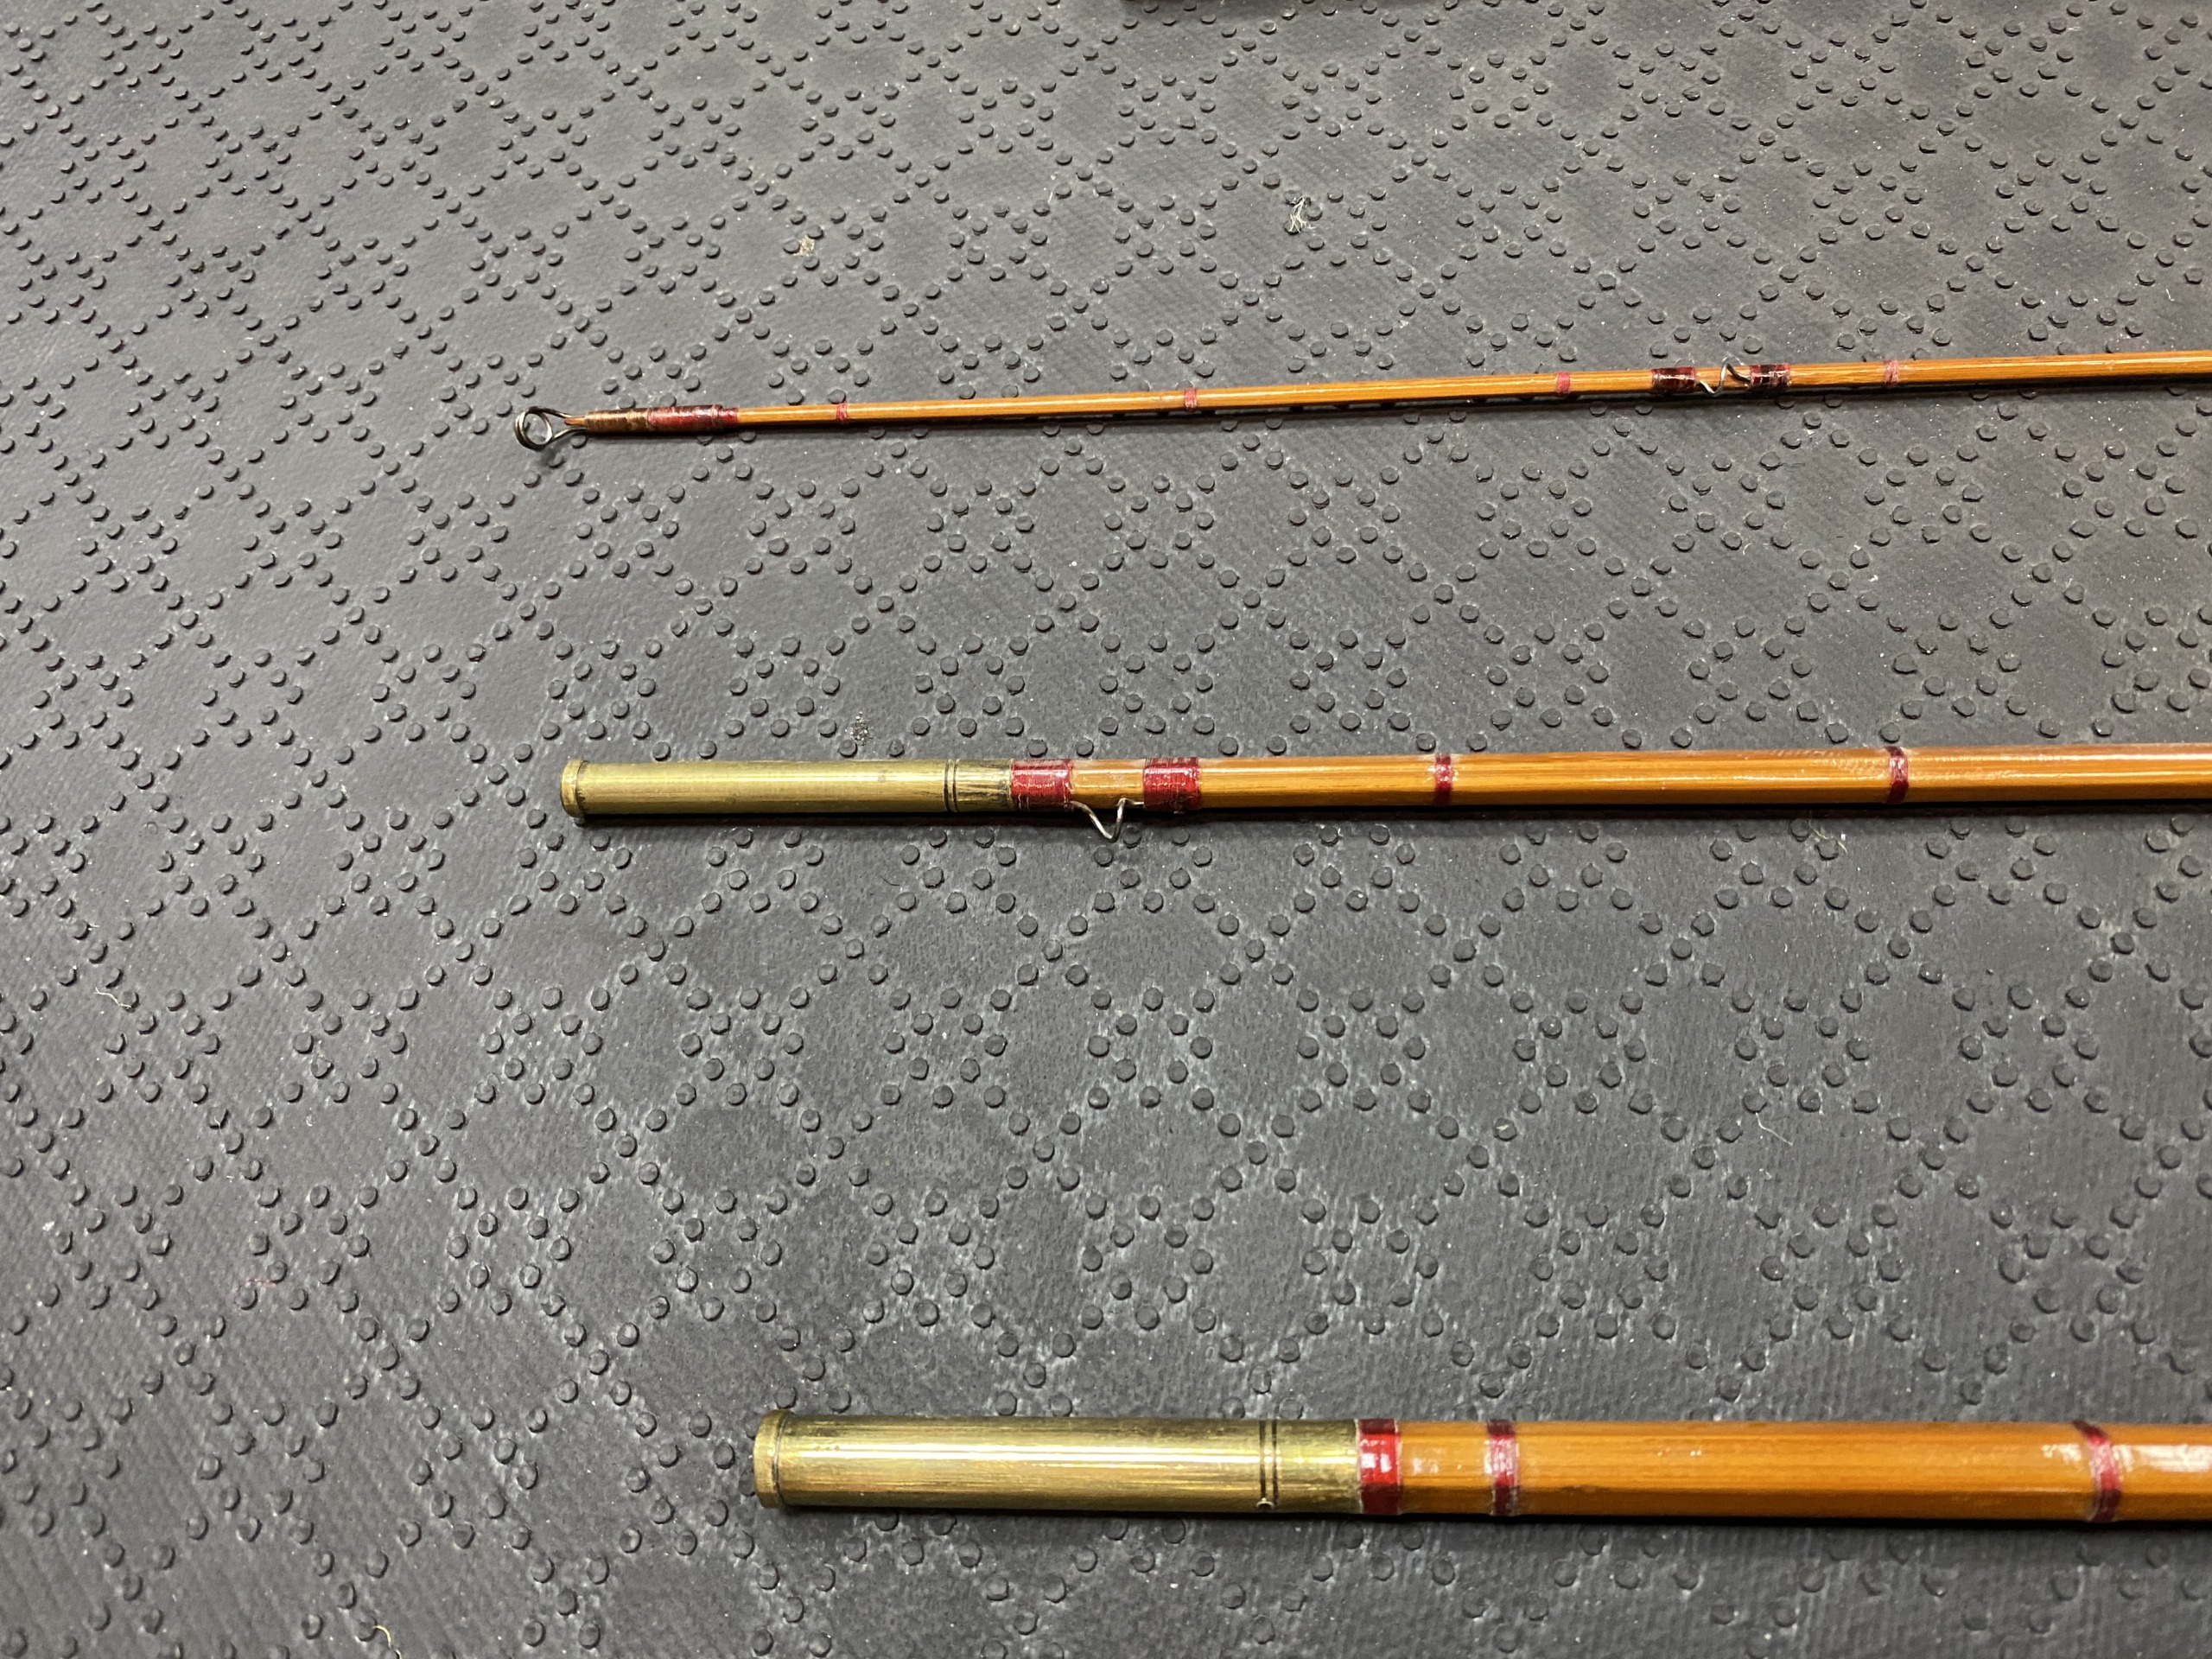 Sold at Auction: Antique Milward's Hexacane Bamboo Spincraft Rod 7 Ft. 2pc